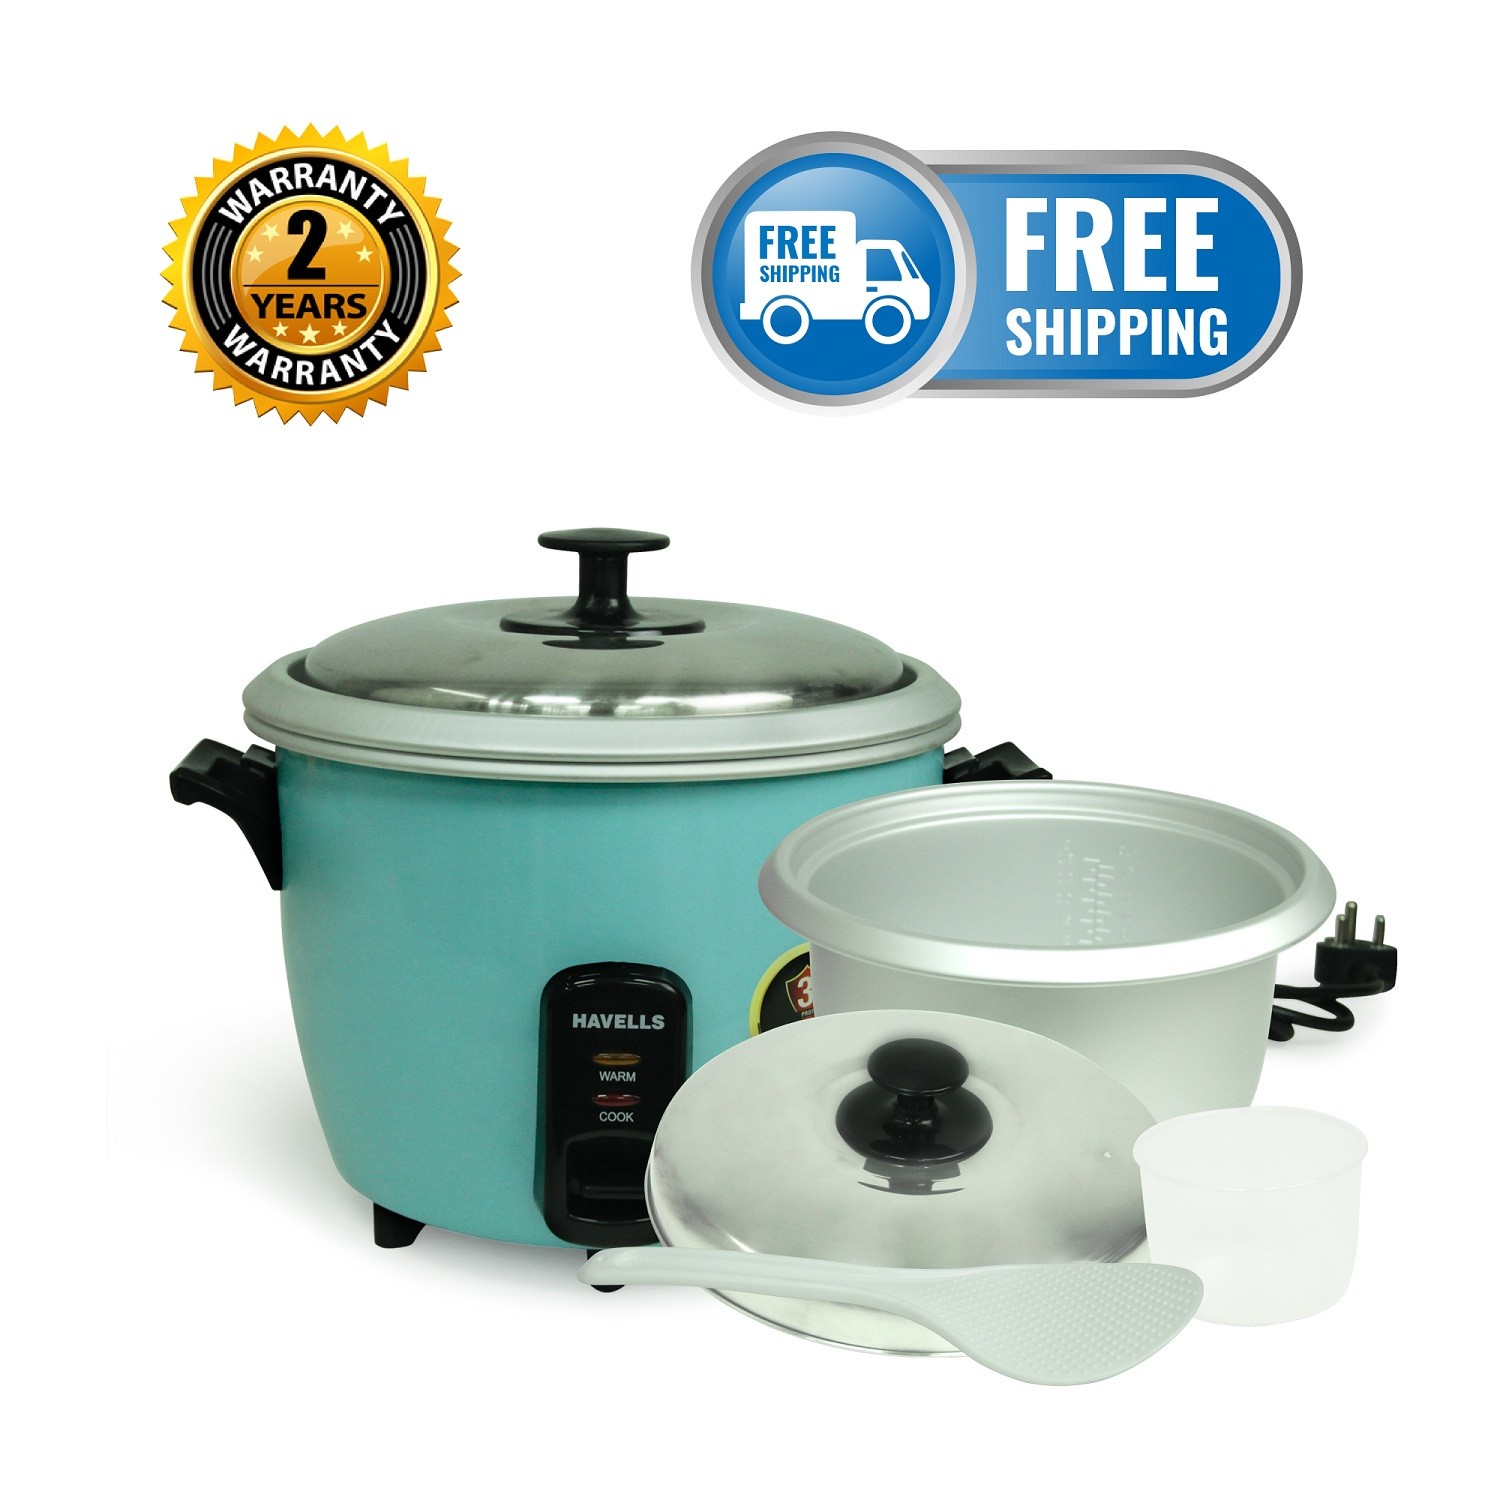 Havells Rice Cooker Best Quality - Sky